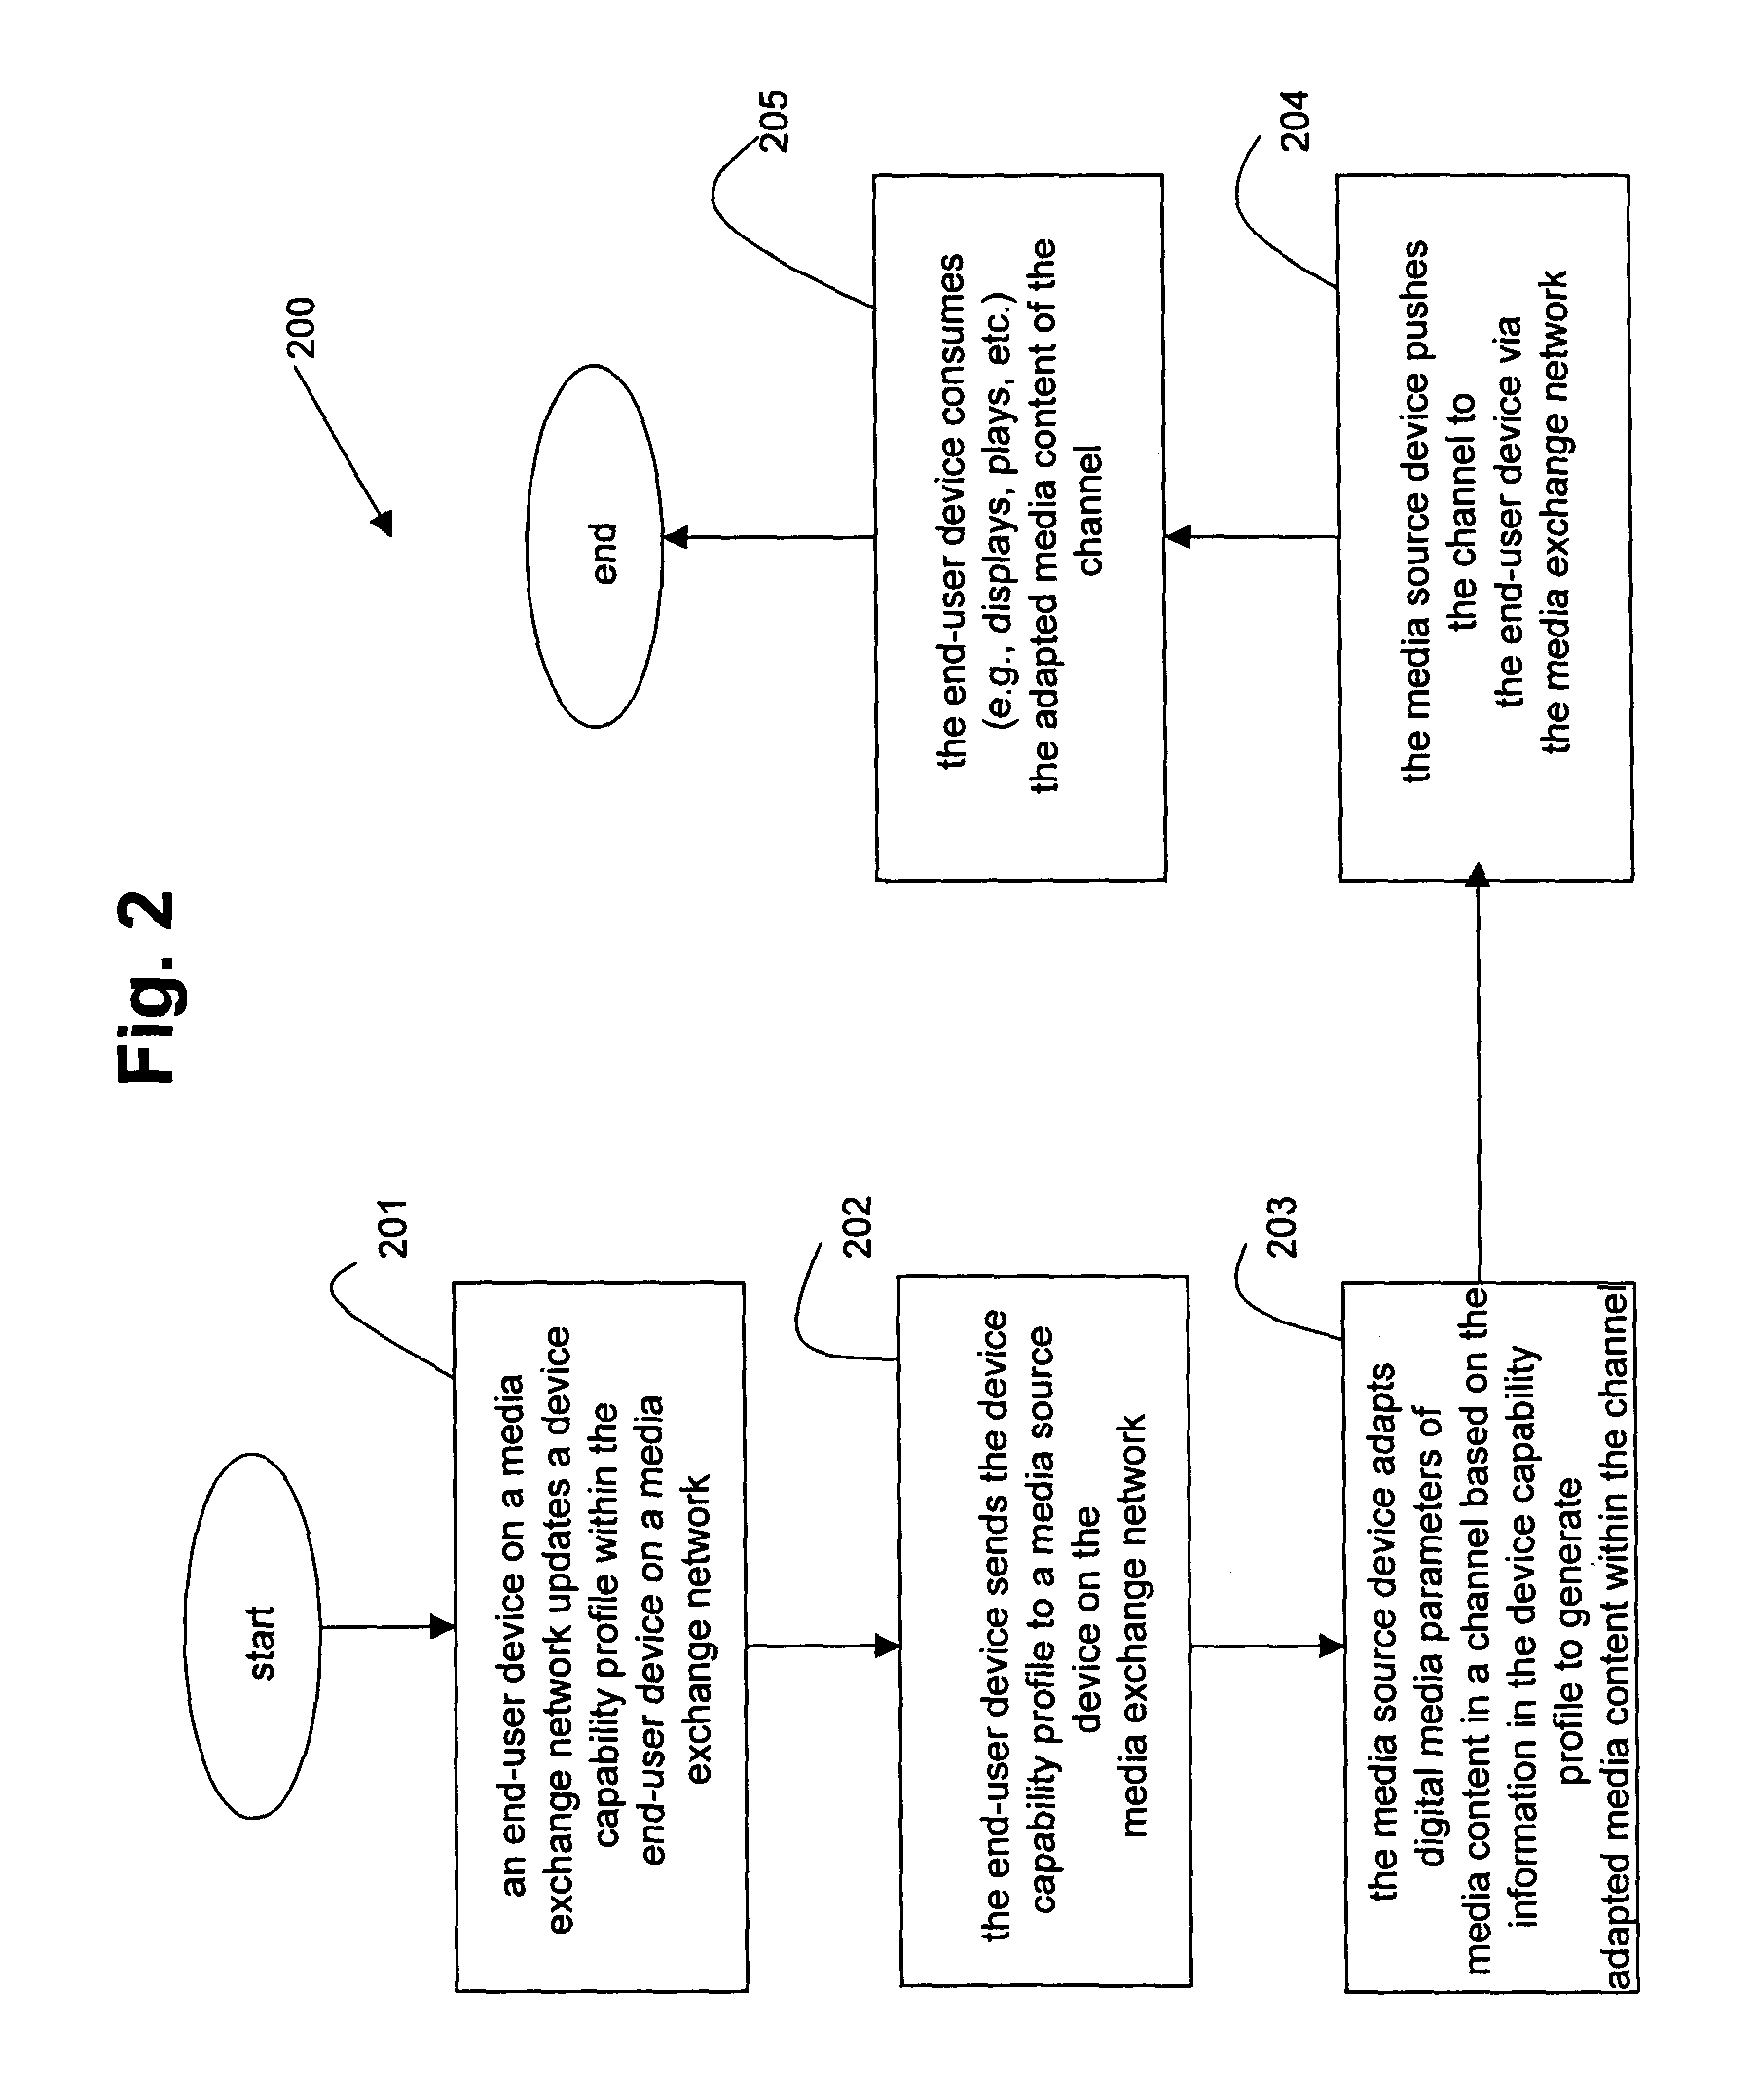 Media processing system supporting adaptive digital media parameters based on end-user viewing capabilities